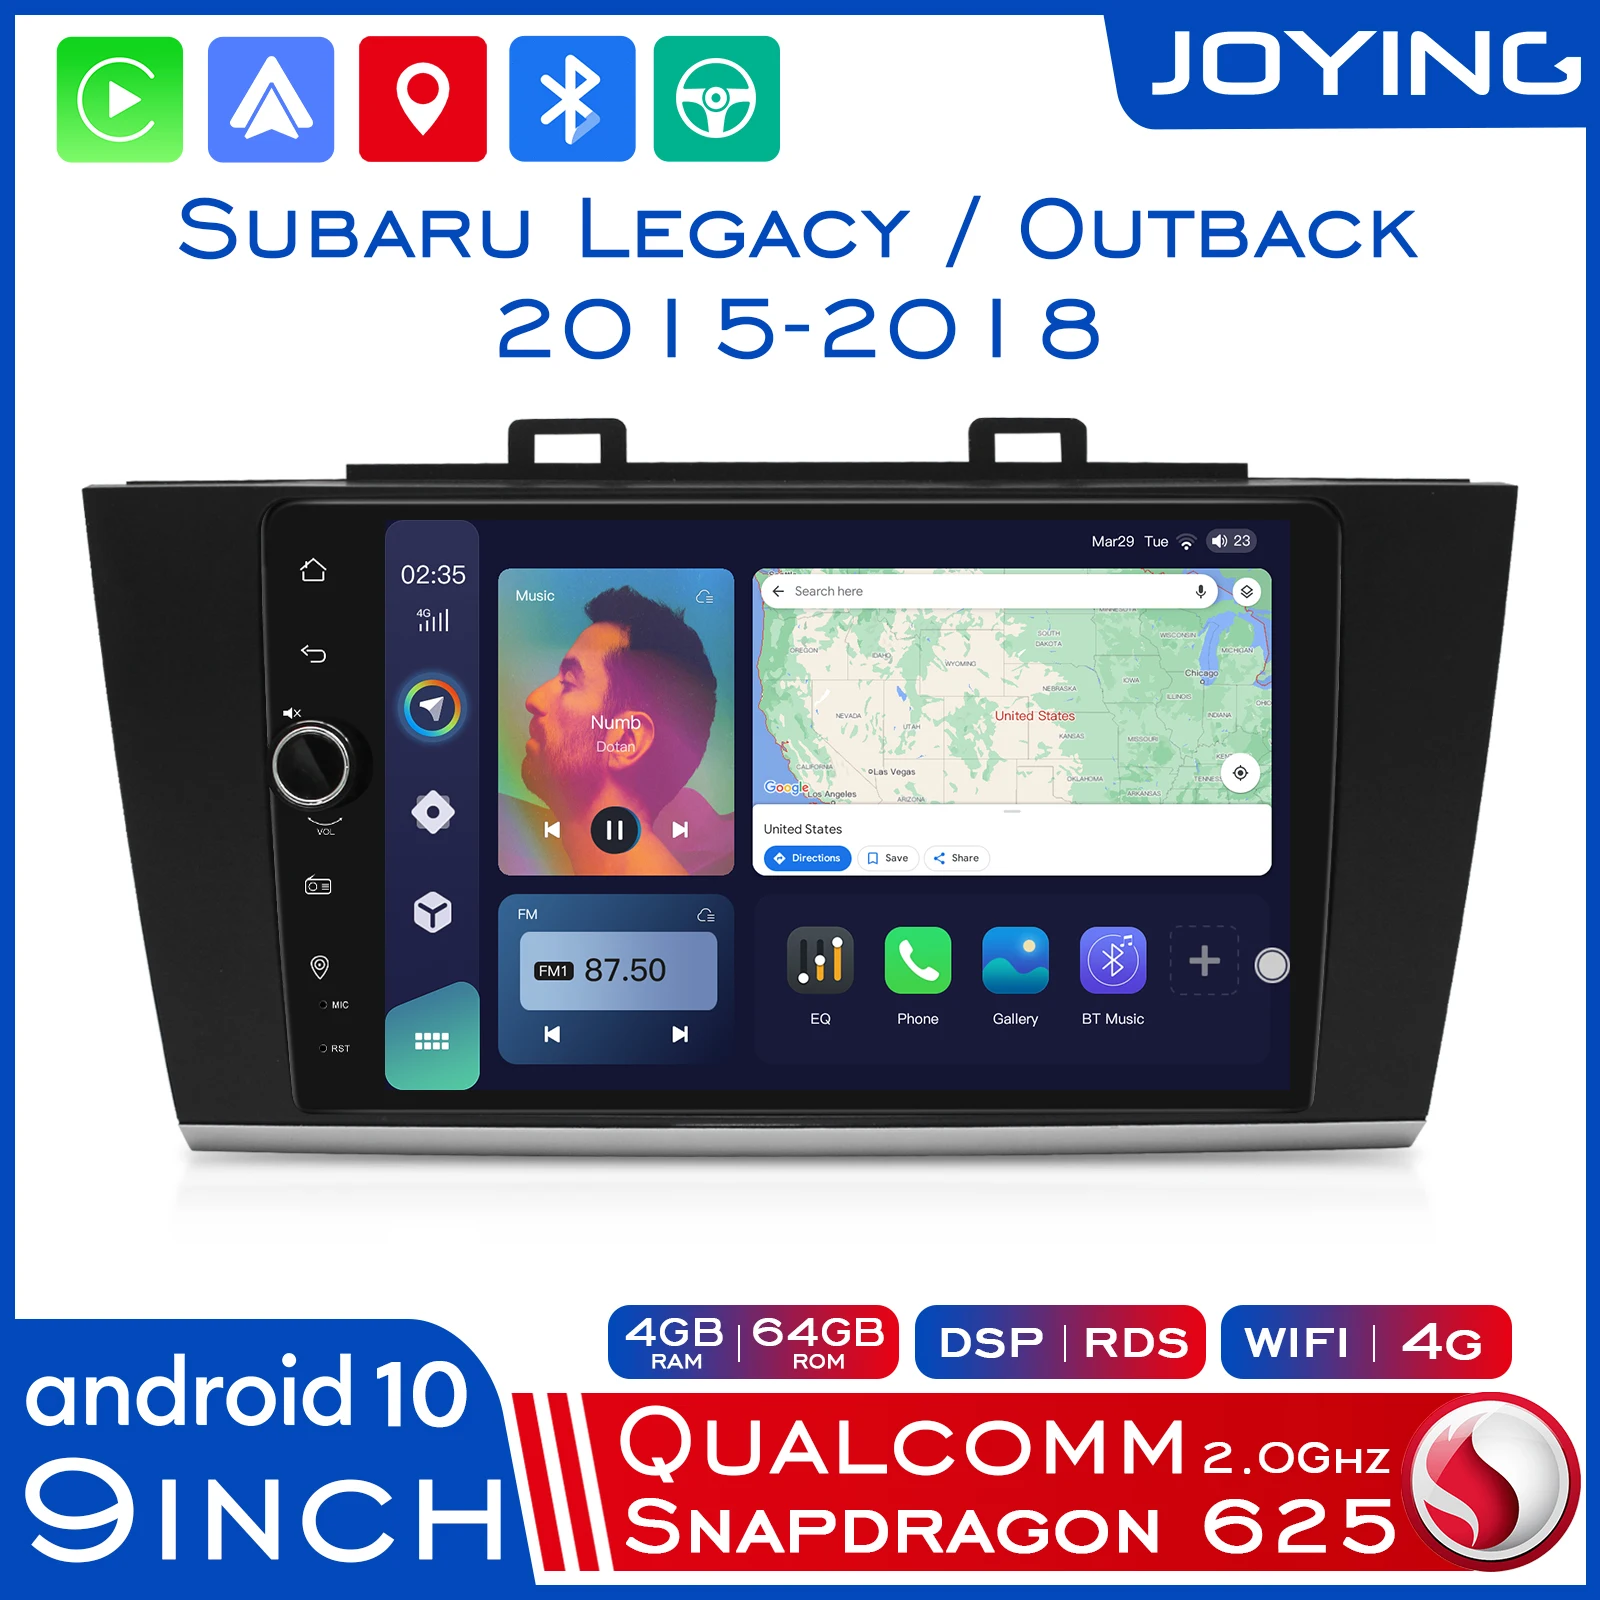 Qualcomm Snapdragon 625 Radio Tape Recorder 1 din Android Car Stereo 9” Wireless Carplay GPS For Subaru Legacy Outback 2015-2018